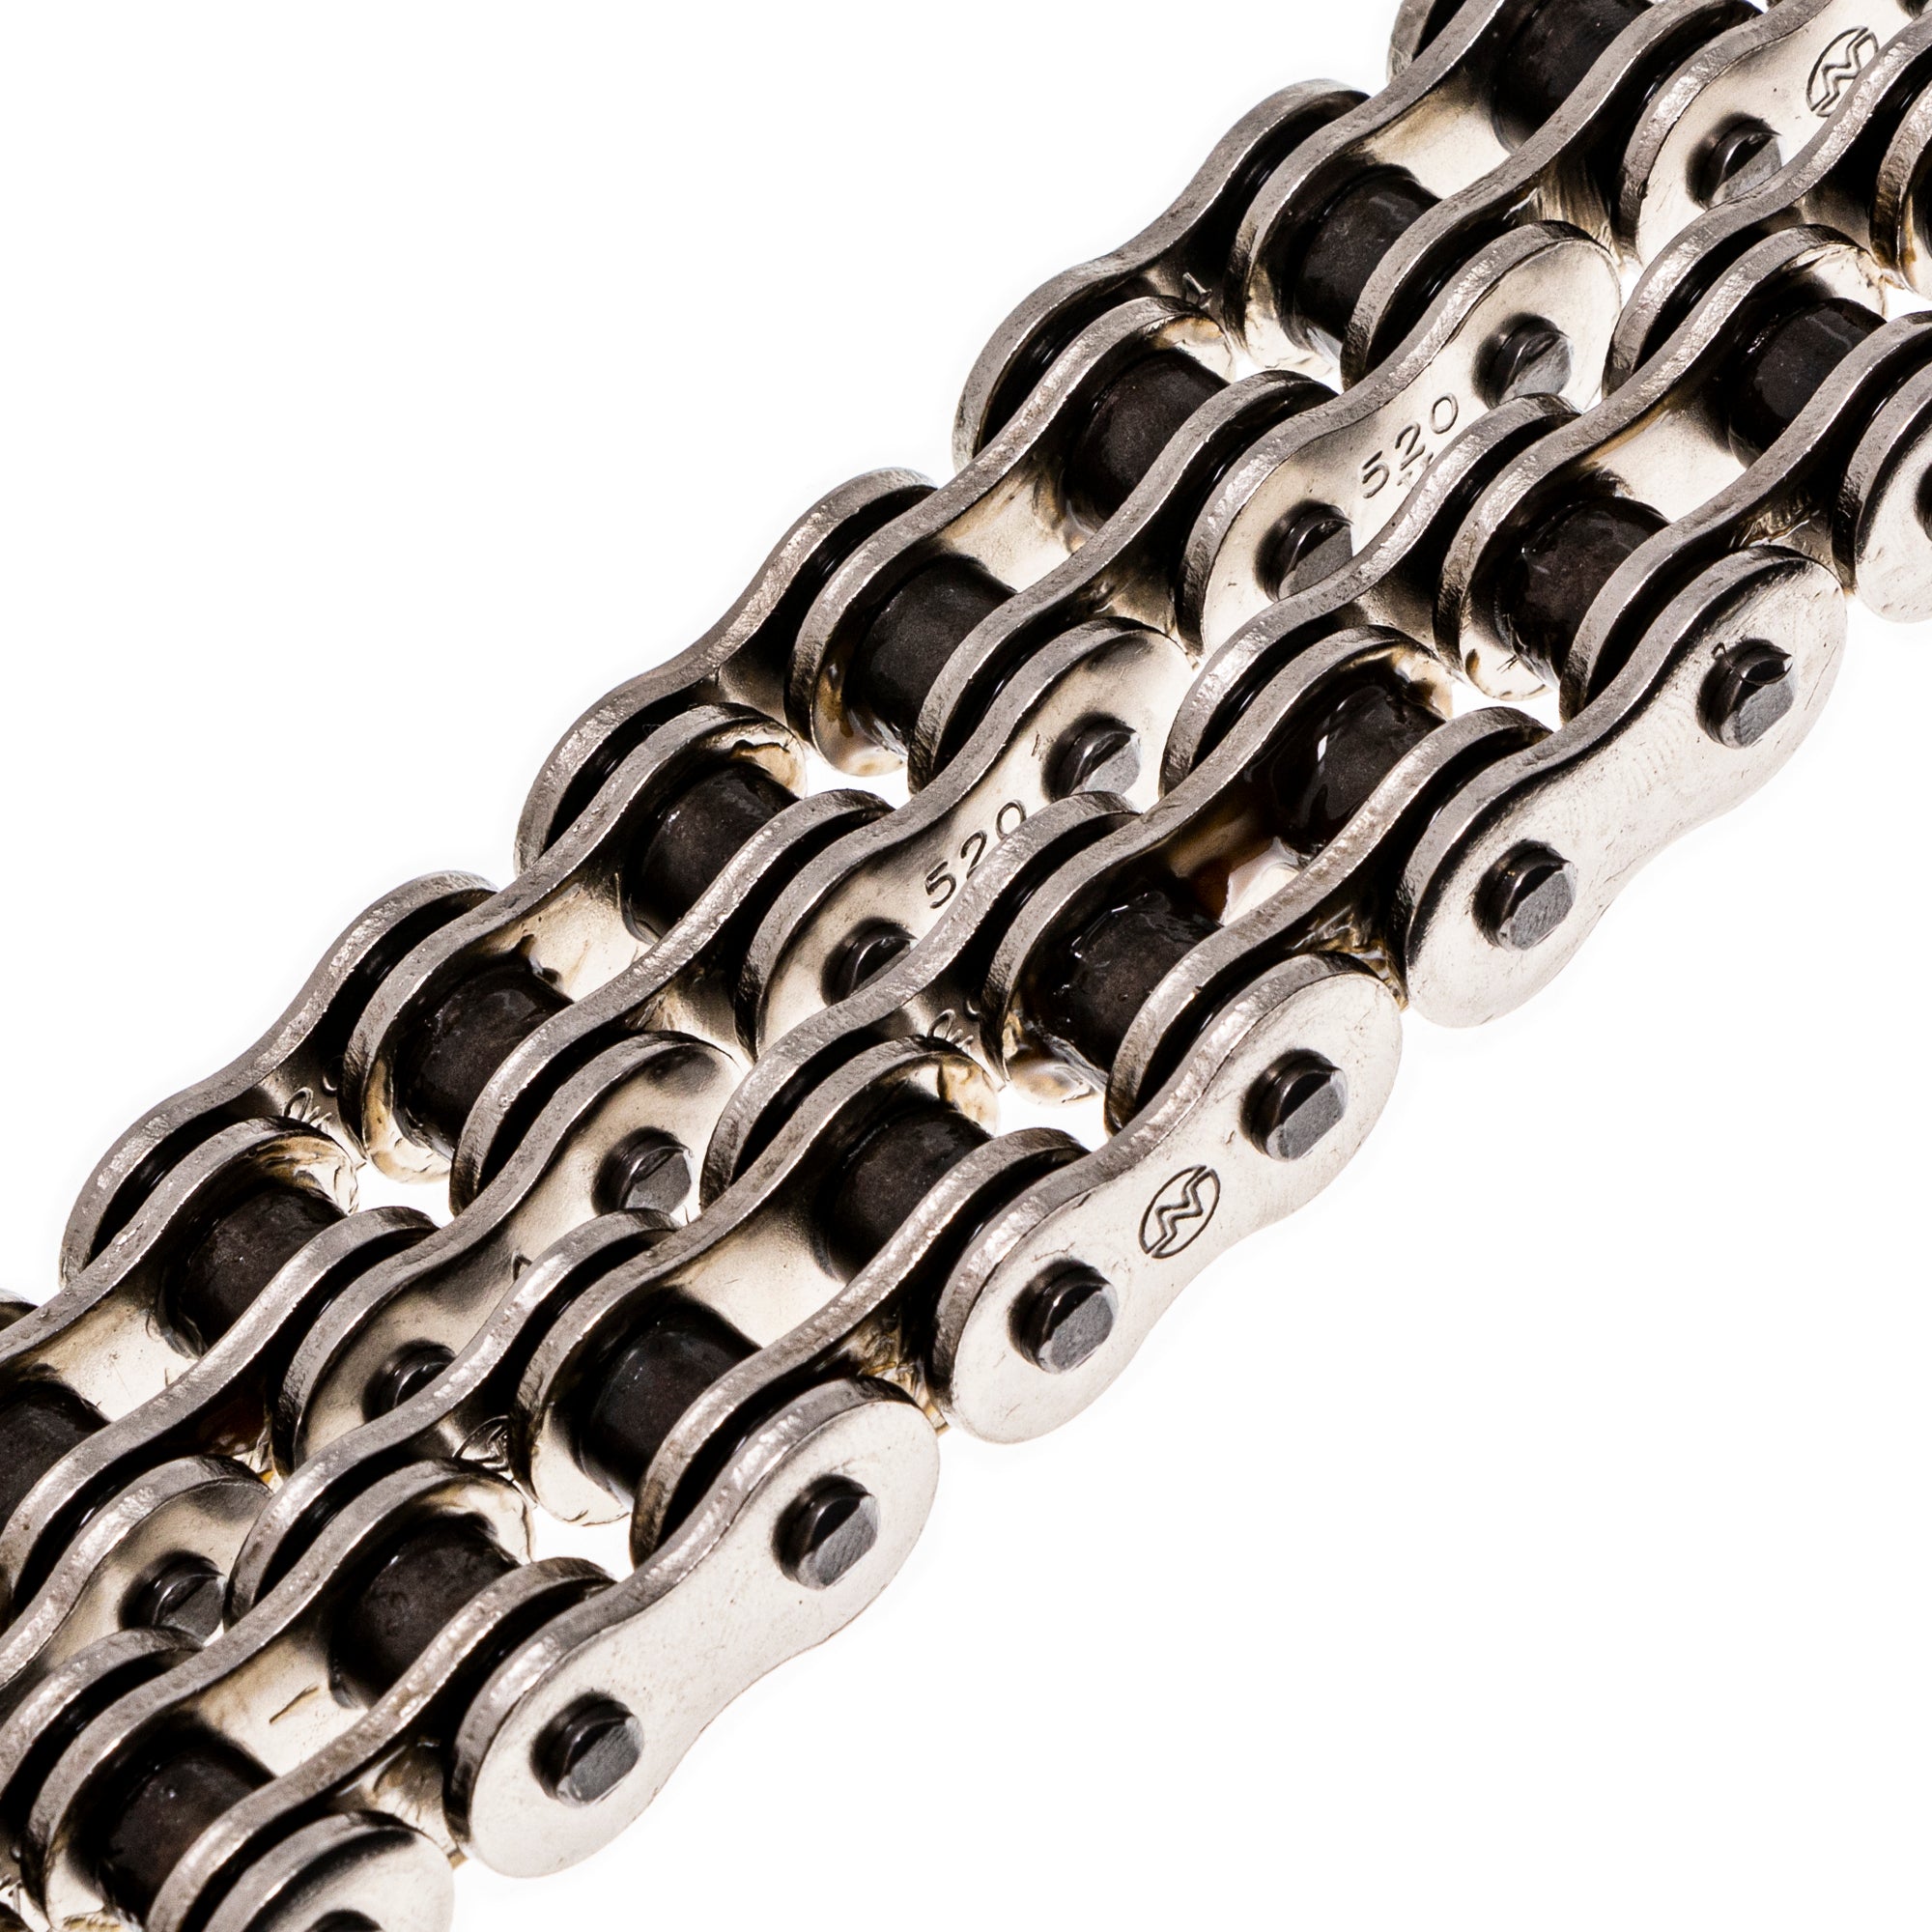 Drive Chain 98 Standard Non O-Ring w/ Master Link for zOTHER Yamaha Polaris Ducati YZ125 NICHE 519-CDC2229H